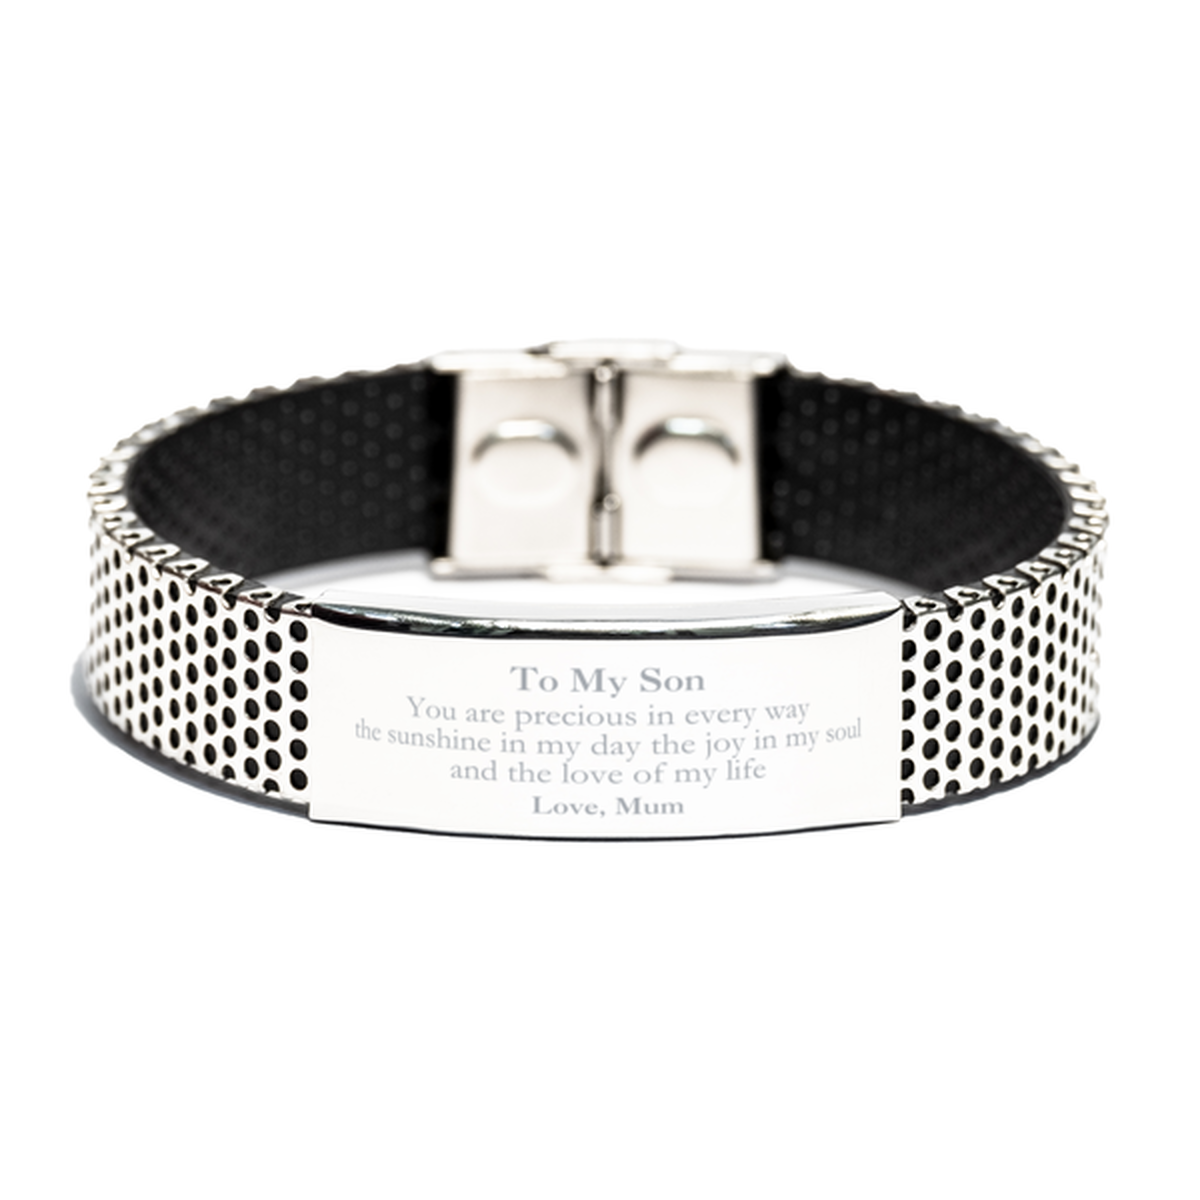 Graduation Gifts for Son Stainless Steel Bracelet Present from Mum, Christmas Son Birthday Gifts Son You are precious in every way the sunshine in my day. Love, Mum